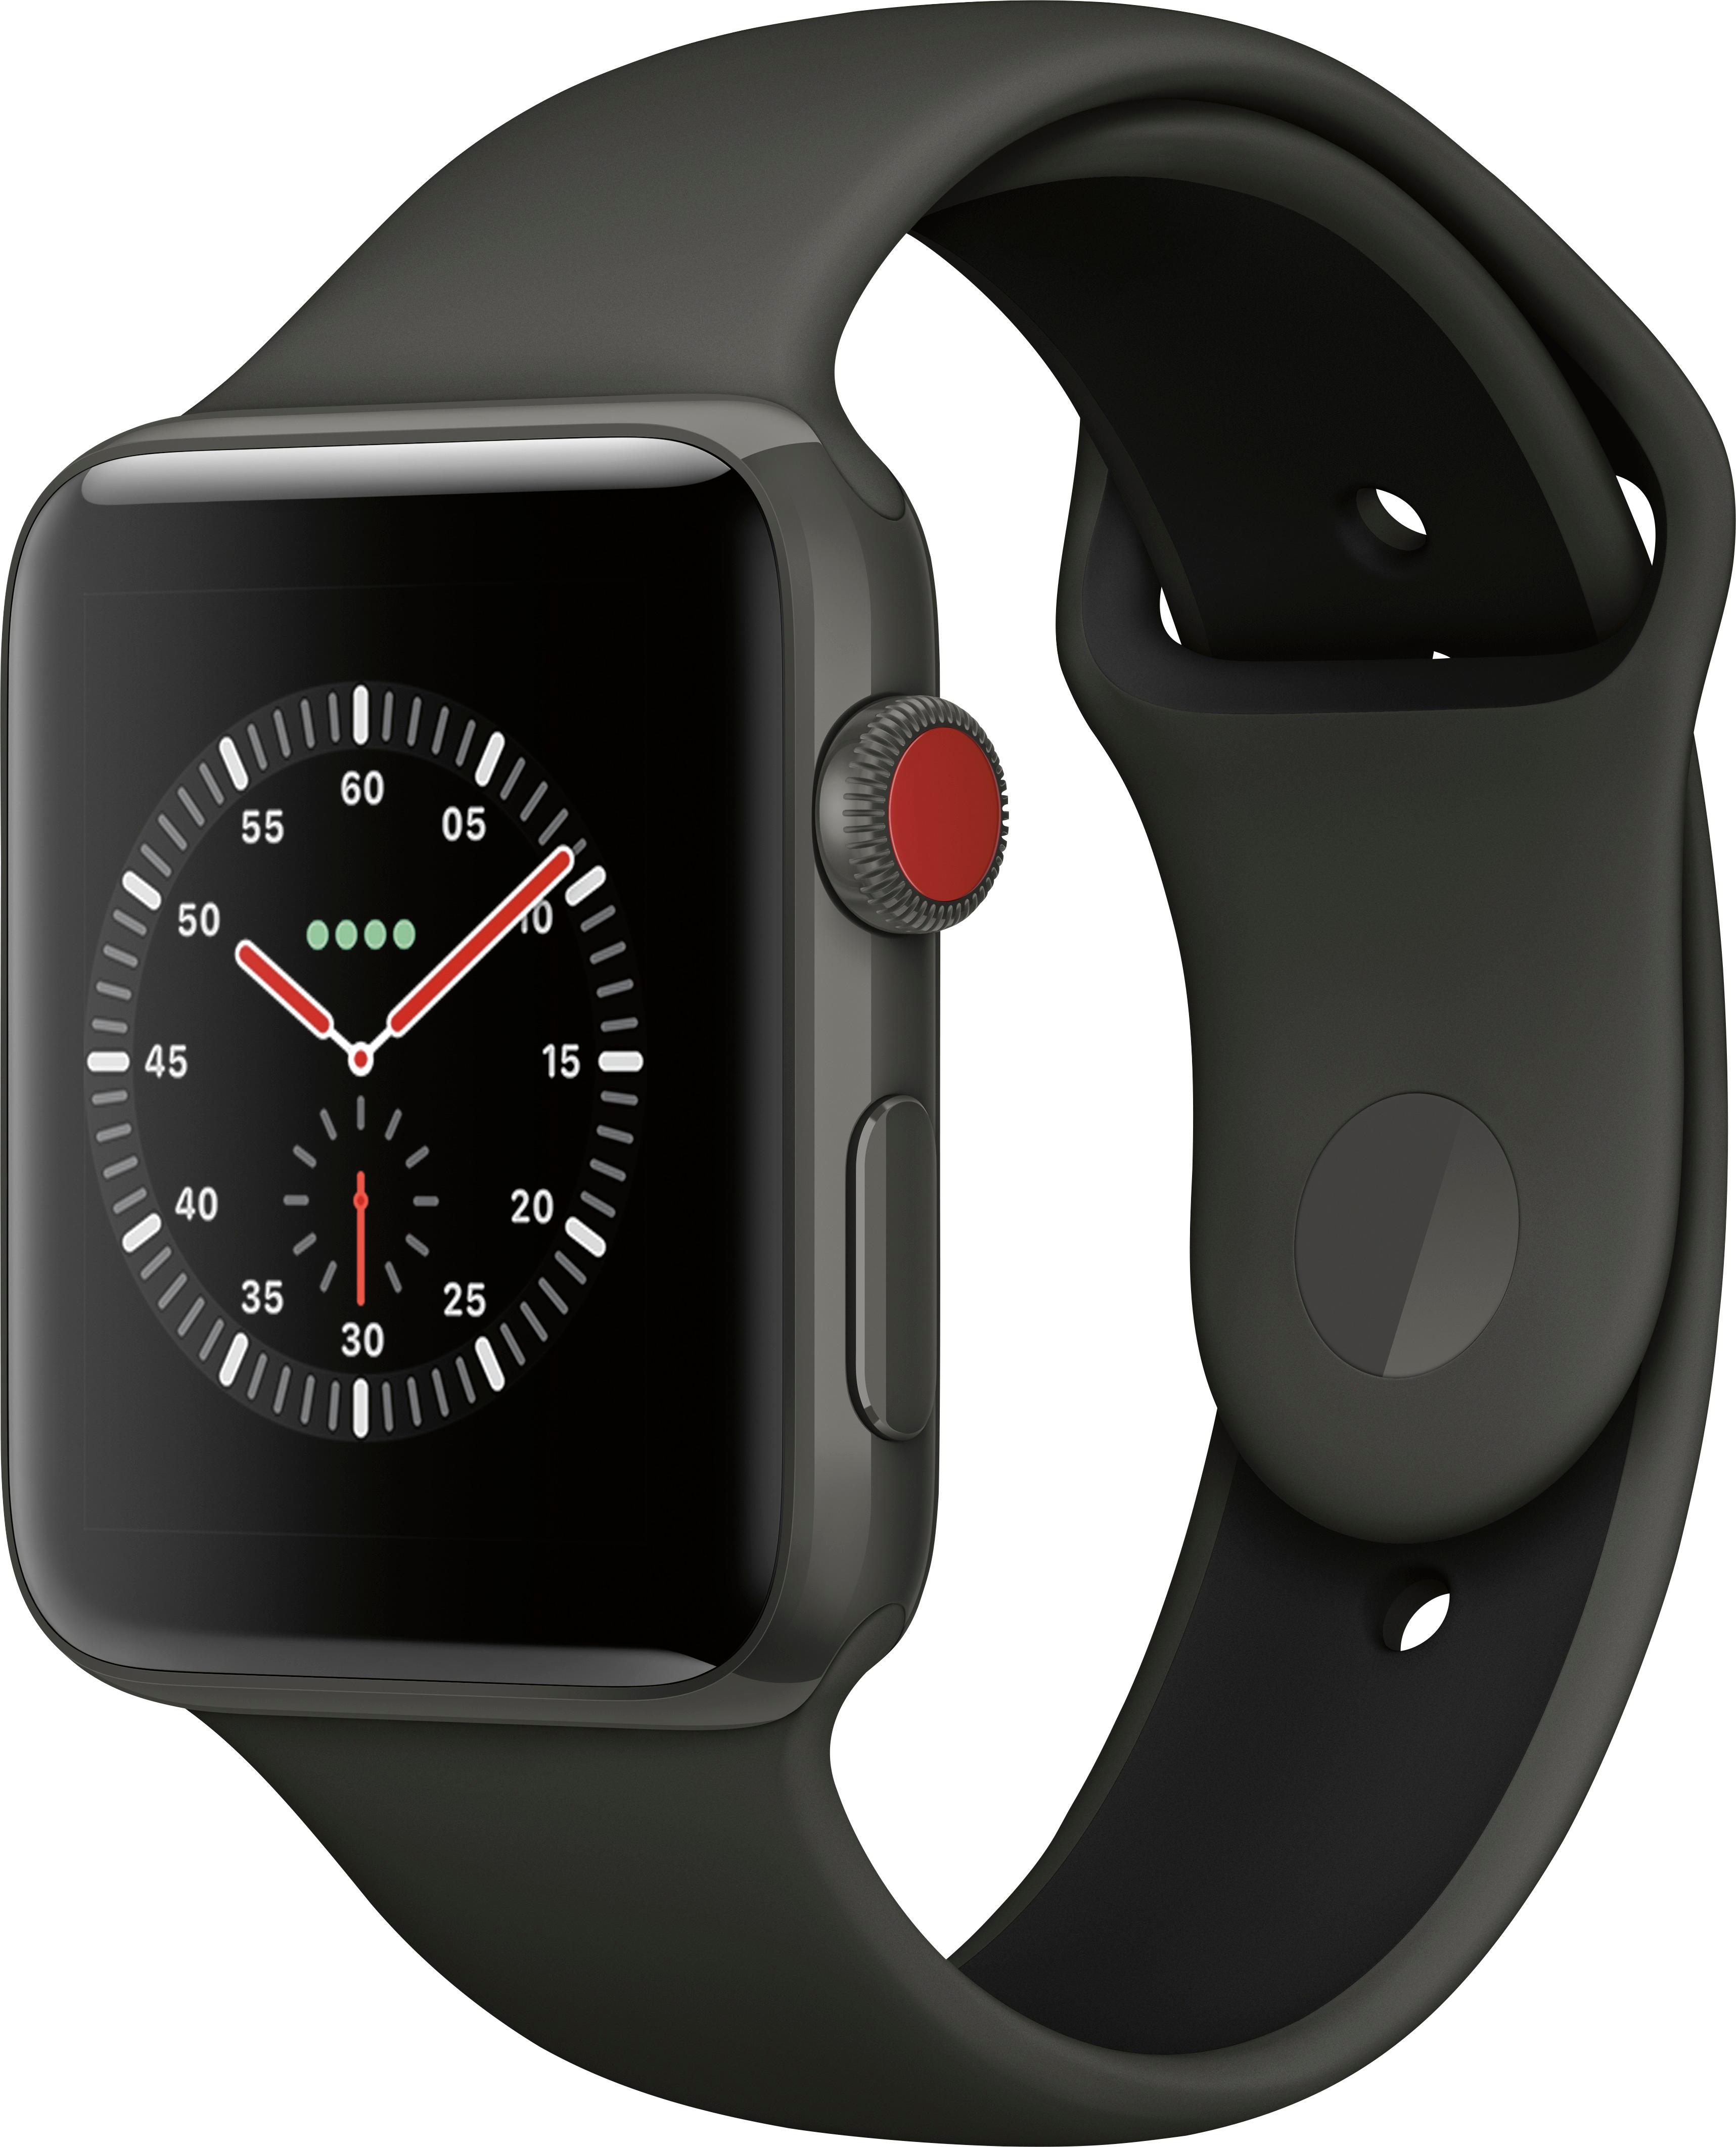 Angle View: Apple Watch Nike+ Series 4 (GPS + Cellular) 44mm Space Gray Aluminum Case with Anthracite/Black Nike Sport Band - Space Gray Aluminum